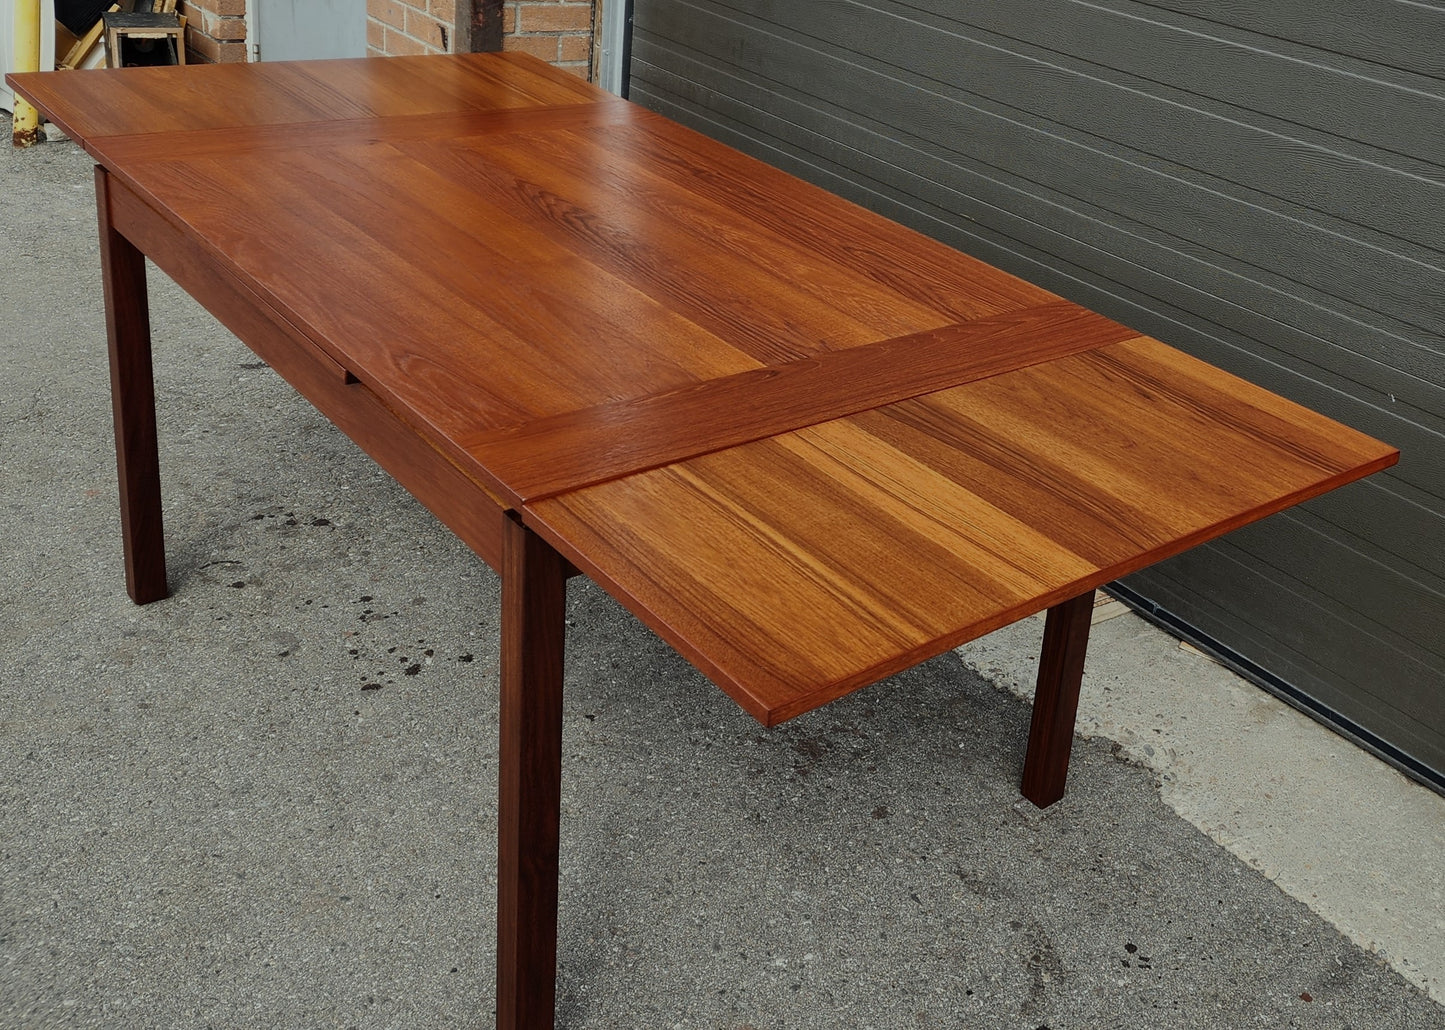 REFINISHED Mid Century Modern Teak Table Draw Leaf by RS Associates 51"-82"